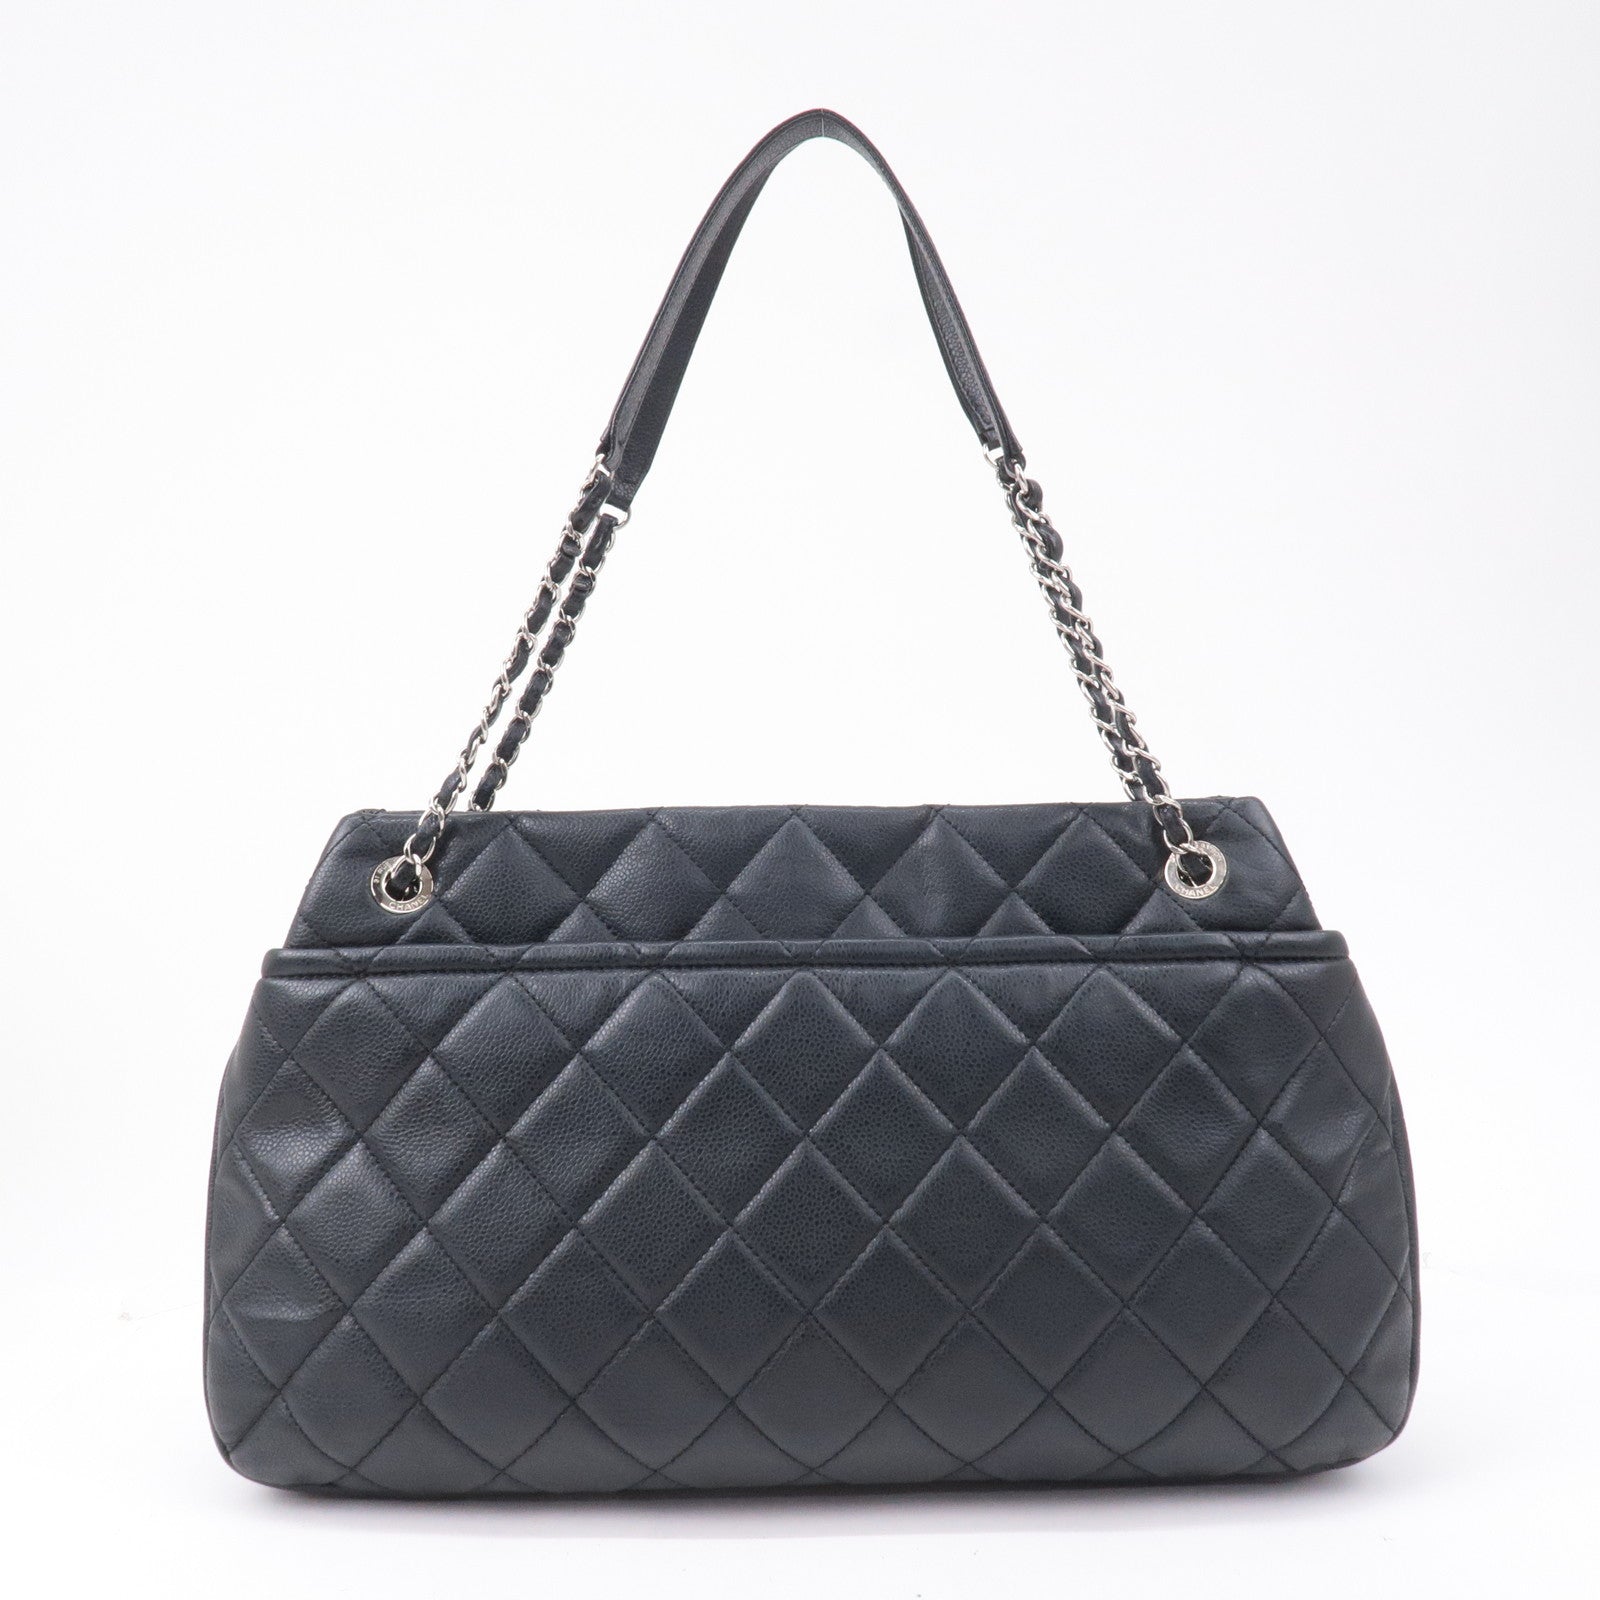 CHANEL, Bags, Chanel Cc Black Caviar Quilted 24kgold Hardware Chain  Carryall Shopper Tote Bag